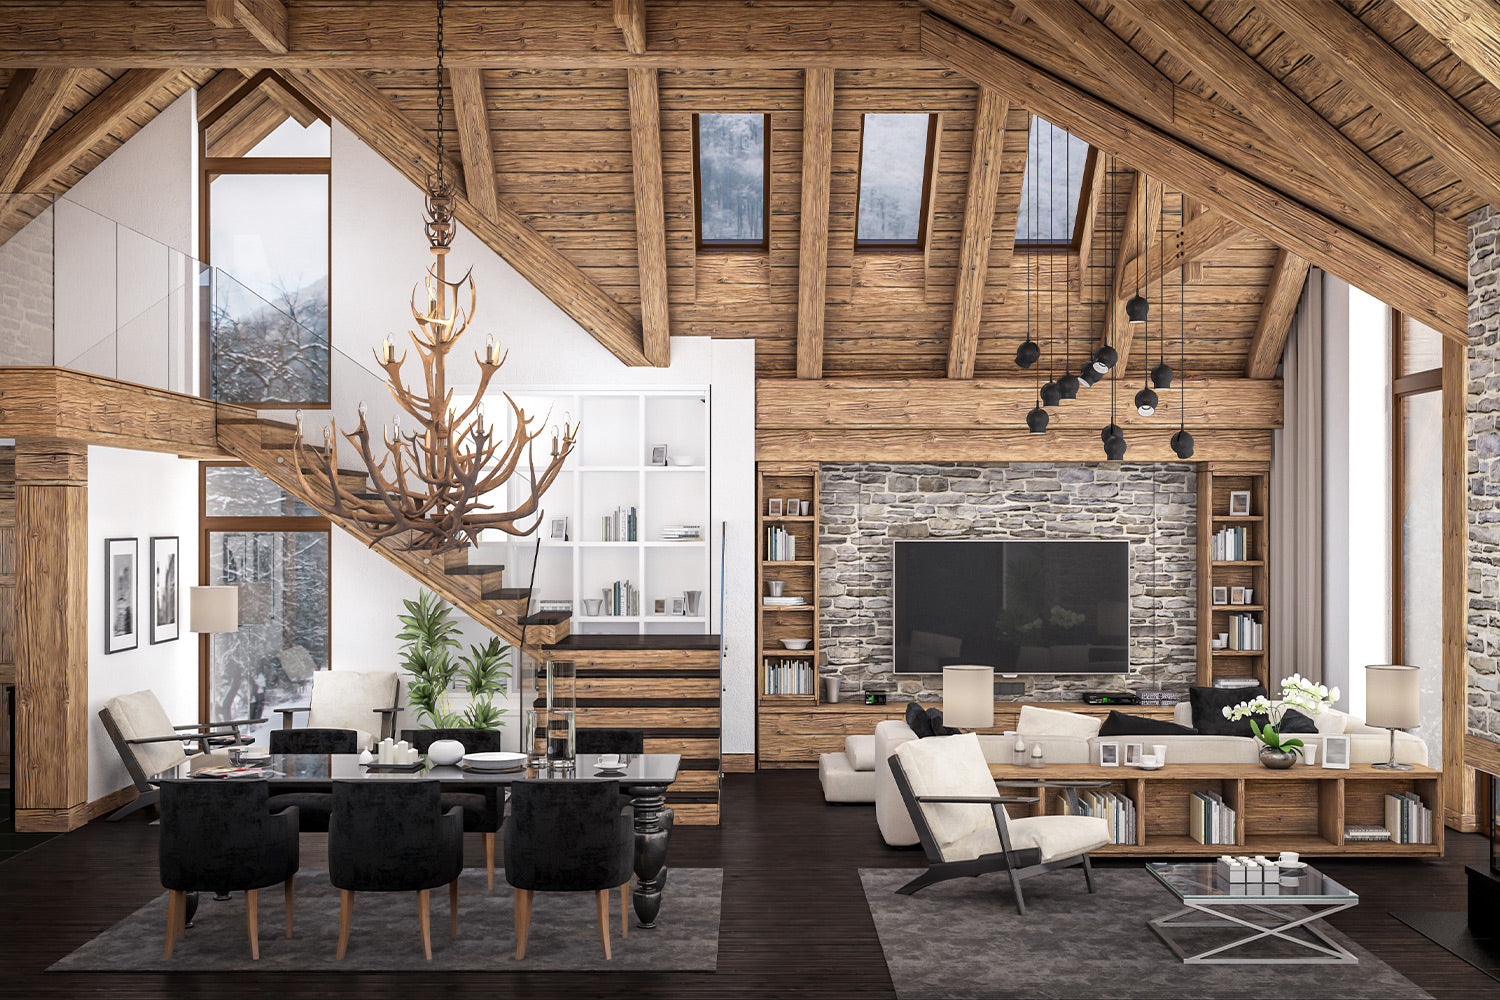 Rustic Interior Design: What Is It and Key Features